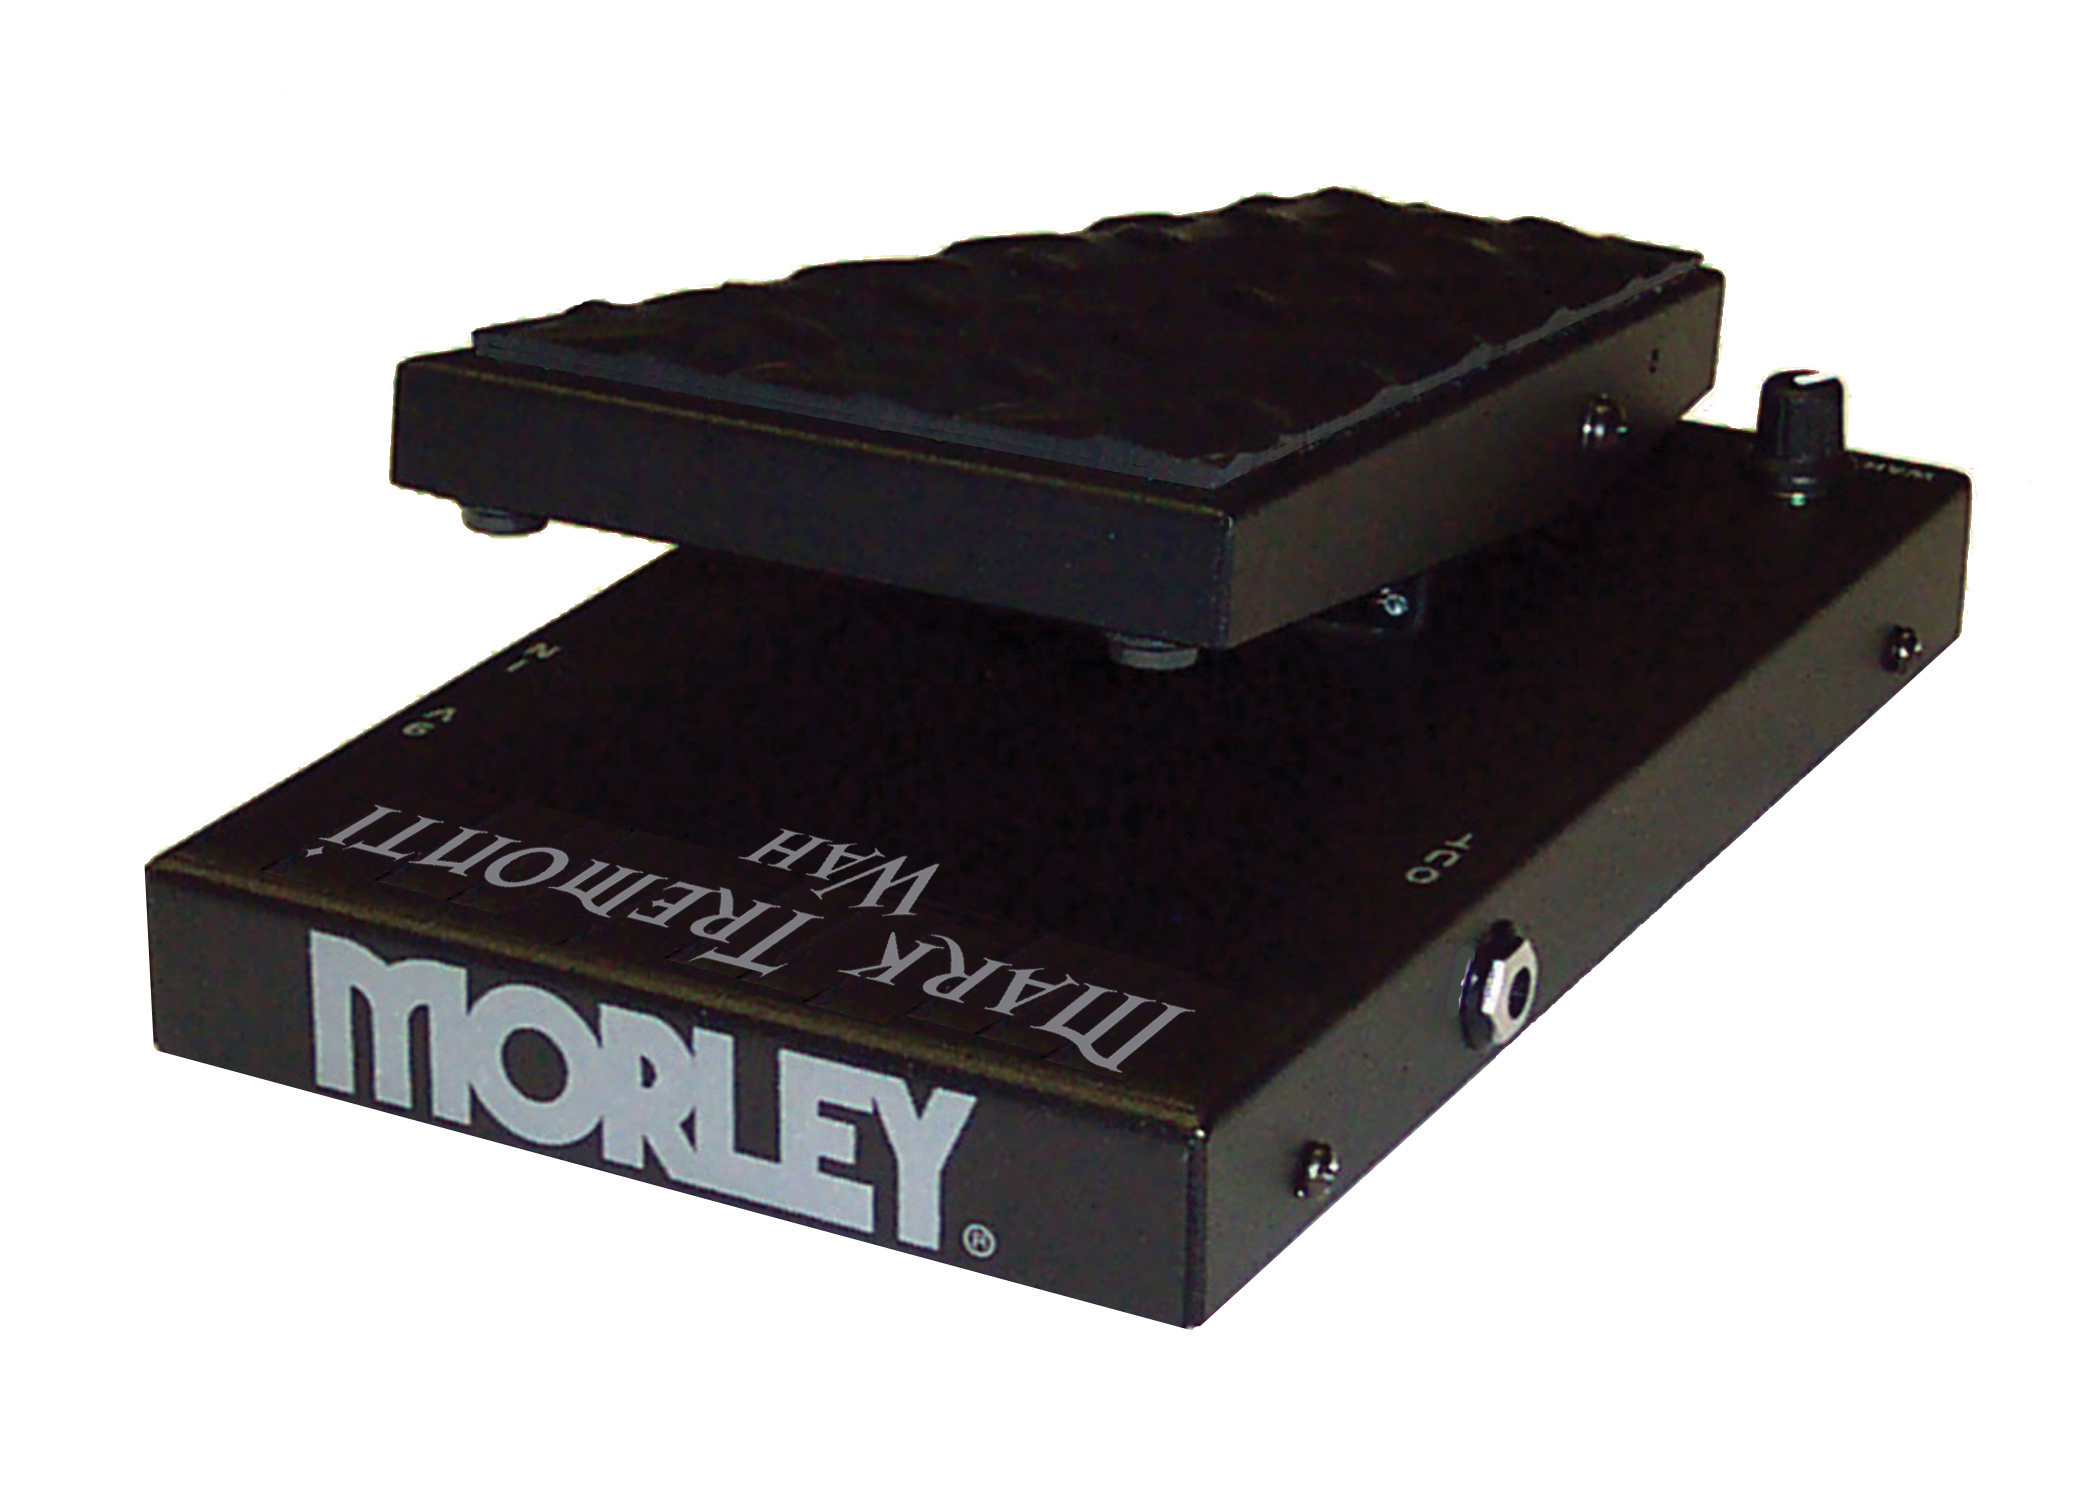 Morley Morley Mark Tremonti Wah Effects Pedal